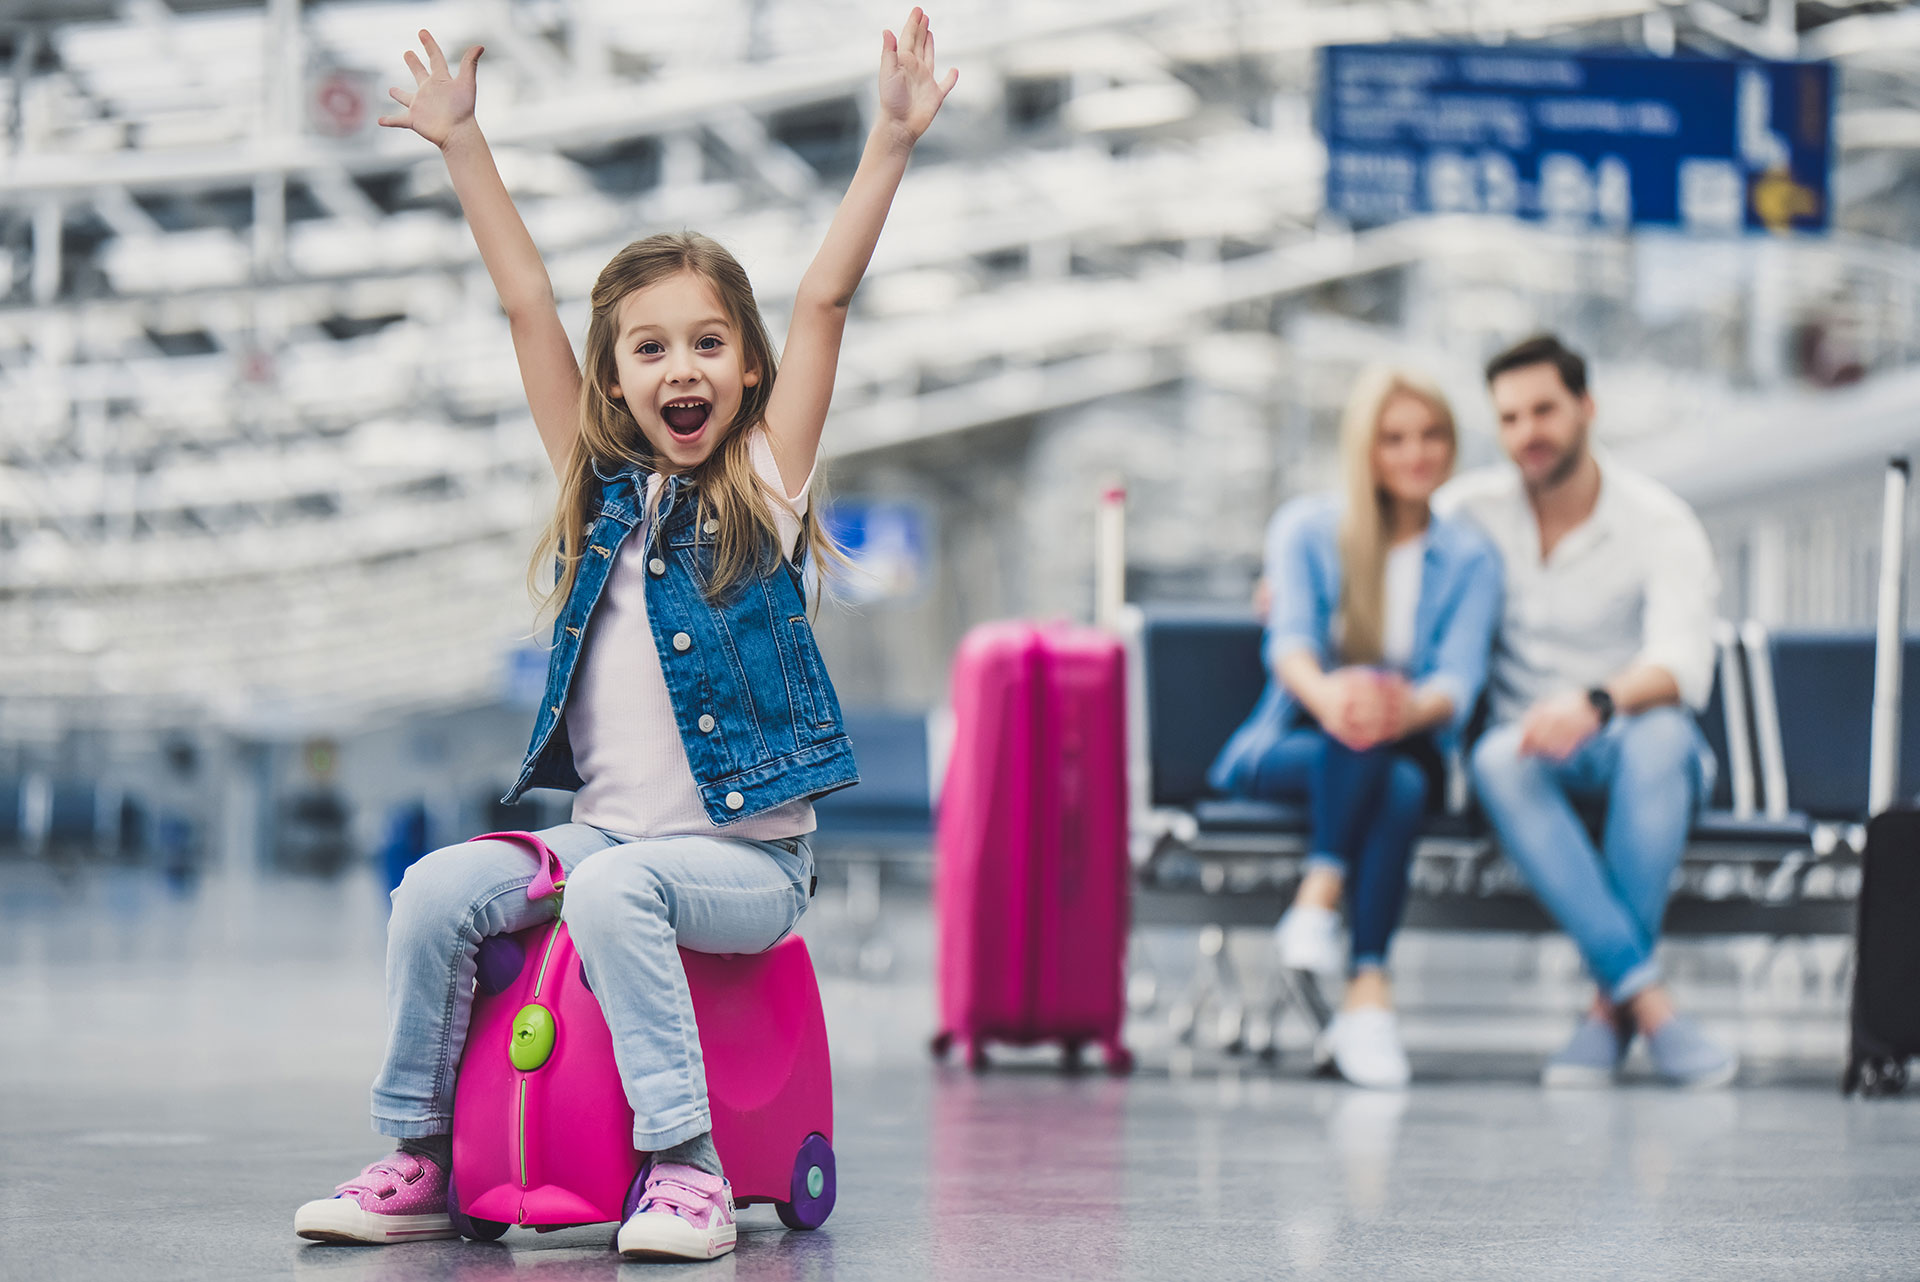 Girl Happy At The Airport; Courtesy of 4PM production/Shutterstock.com